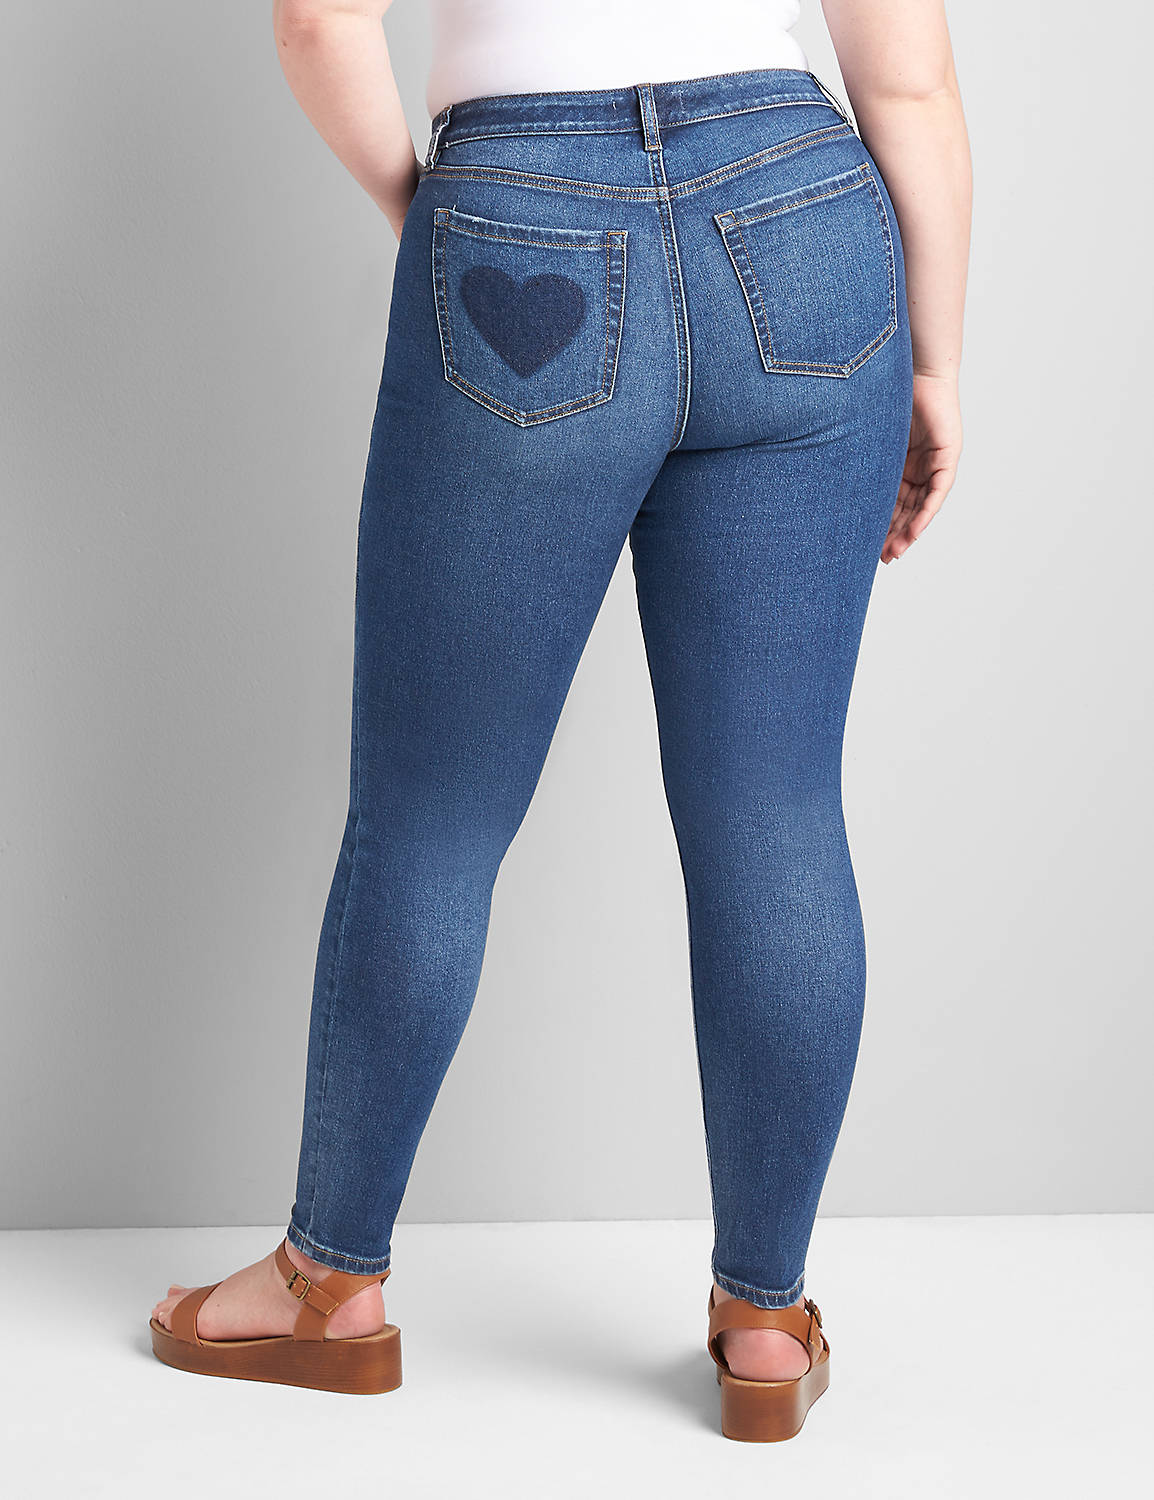 Signature Fit Skinny Jean Product Image 1